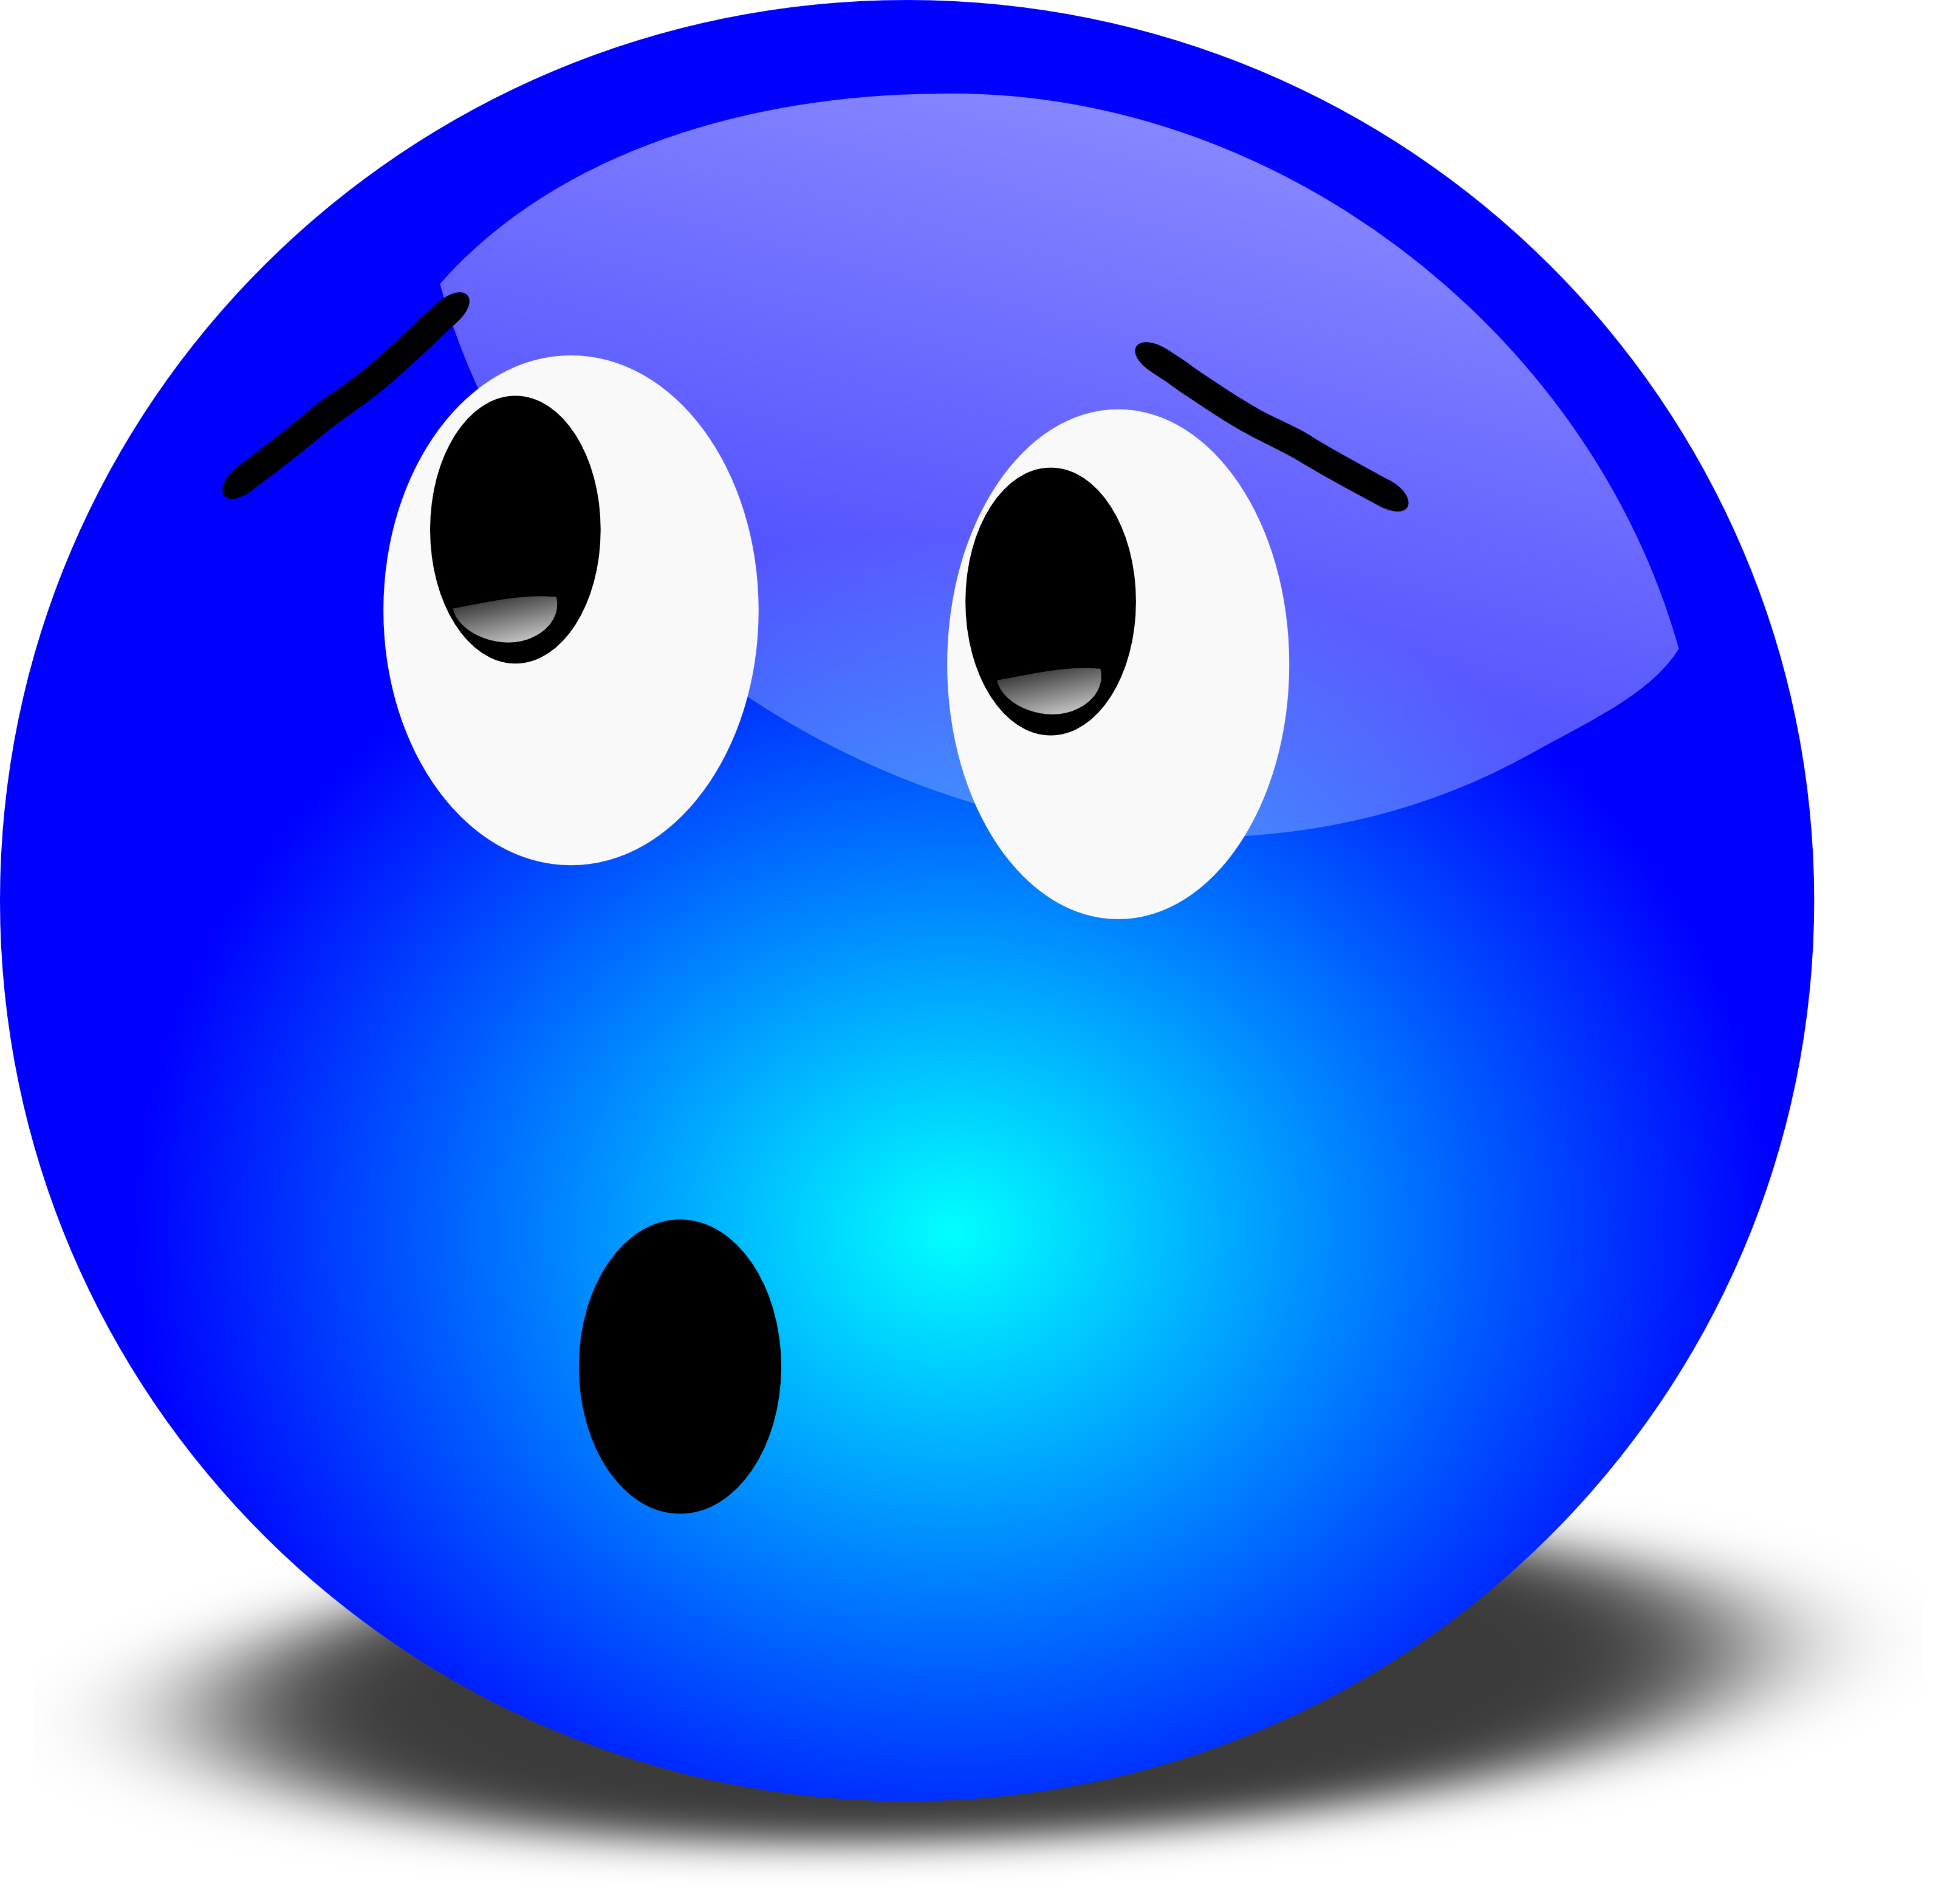 Free 3D Worried Smiley Face Clipart Illustration